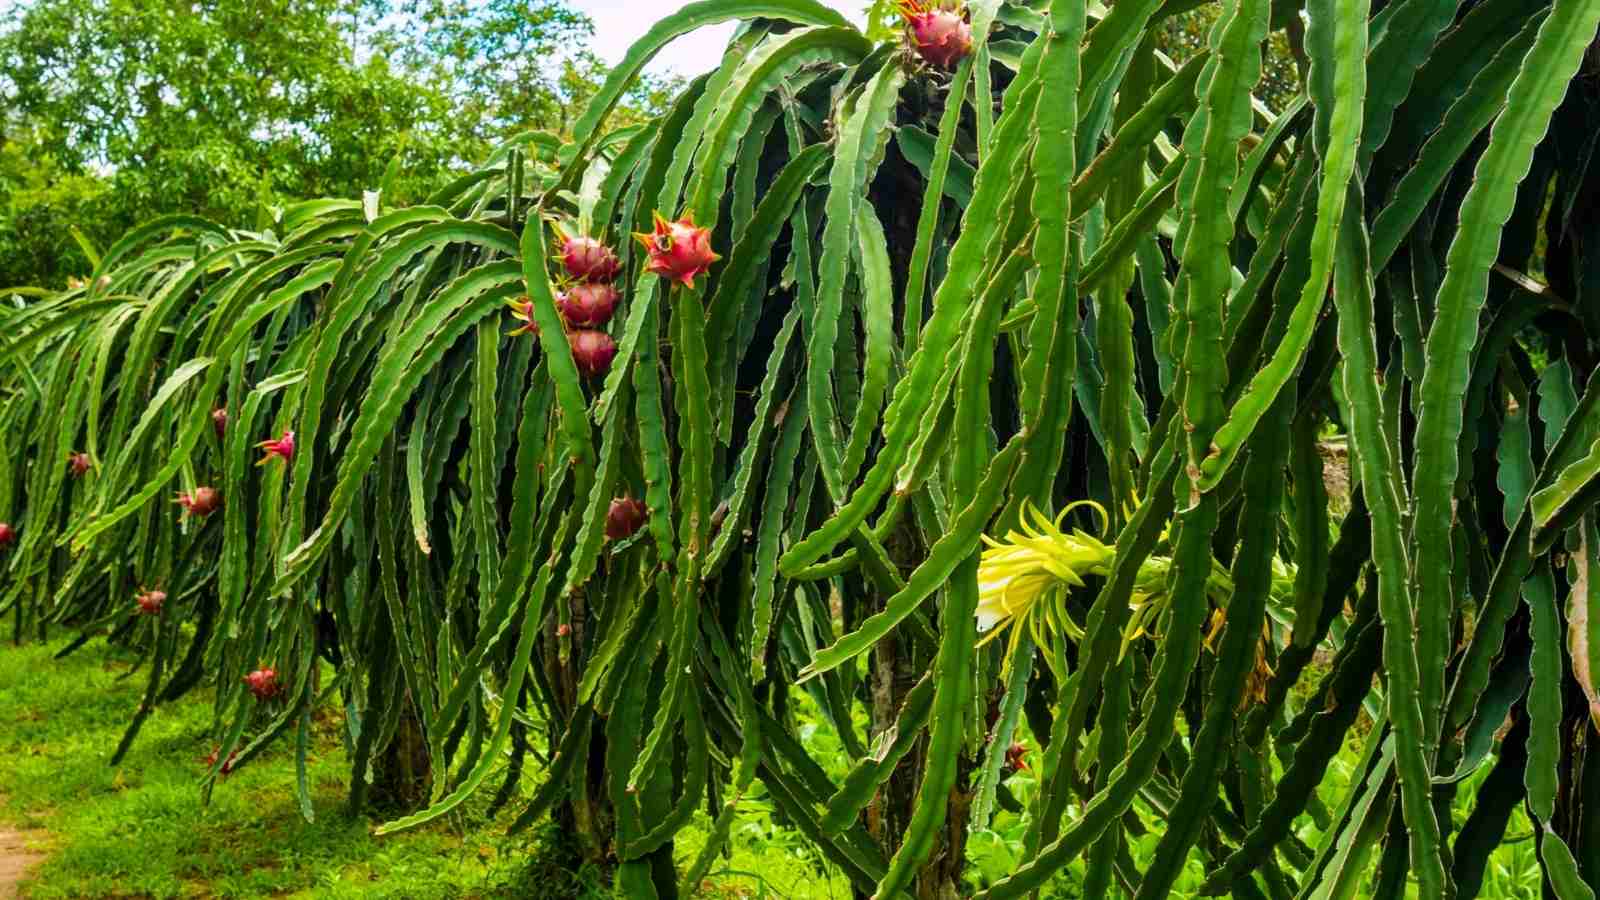 climatic conditions required to grow better dragon fruits in India